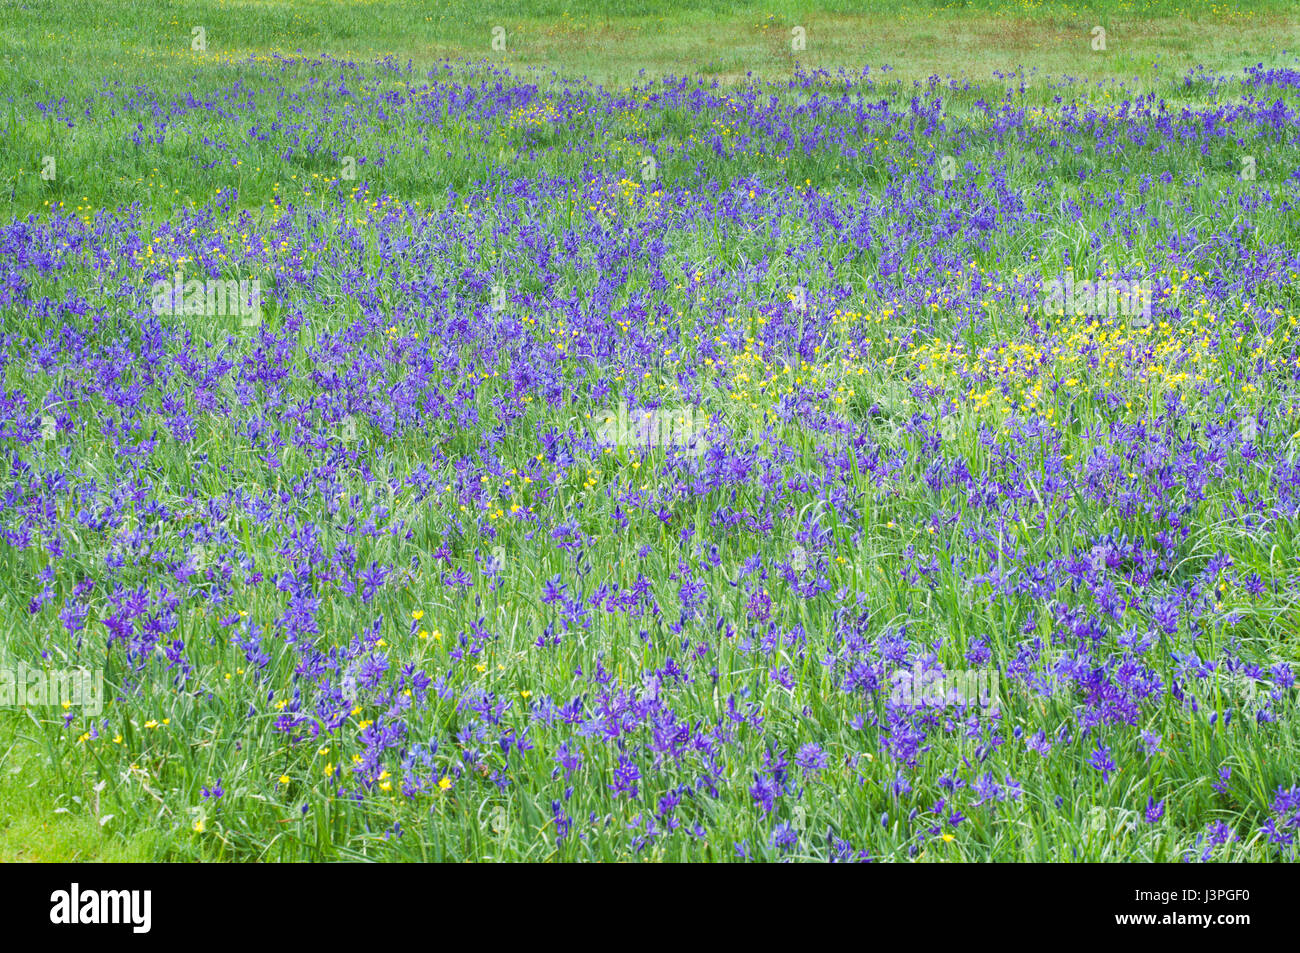 Beautiful meadow of blue camas flowers in green grass Stock Photo